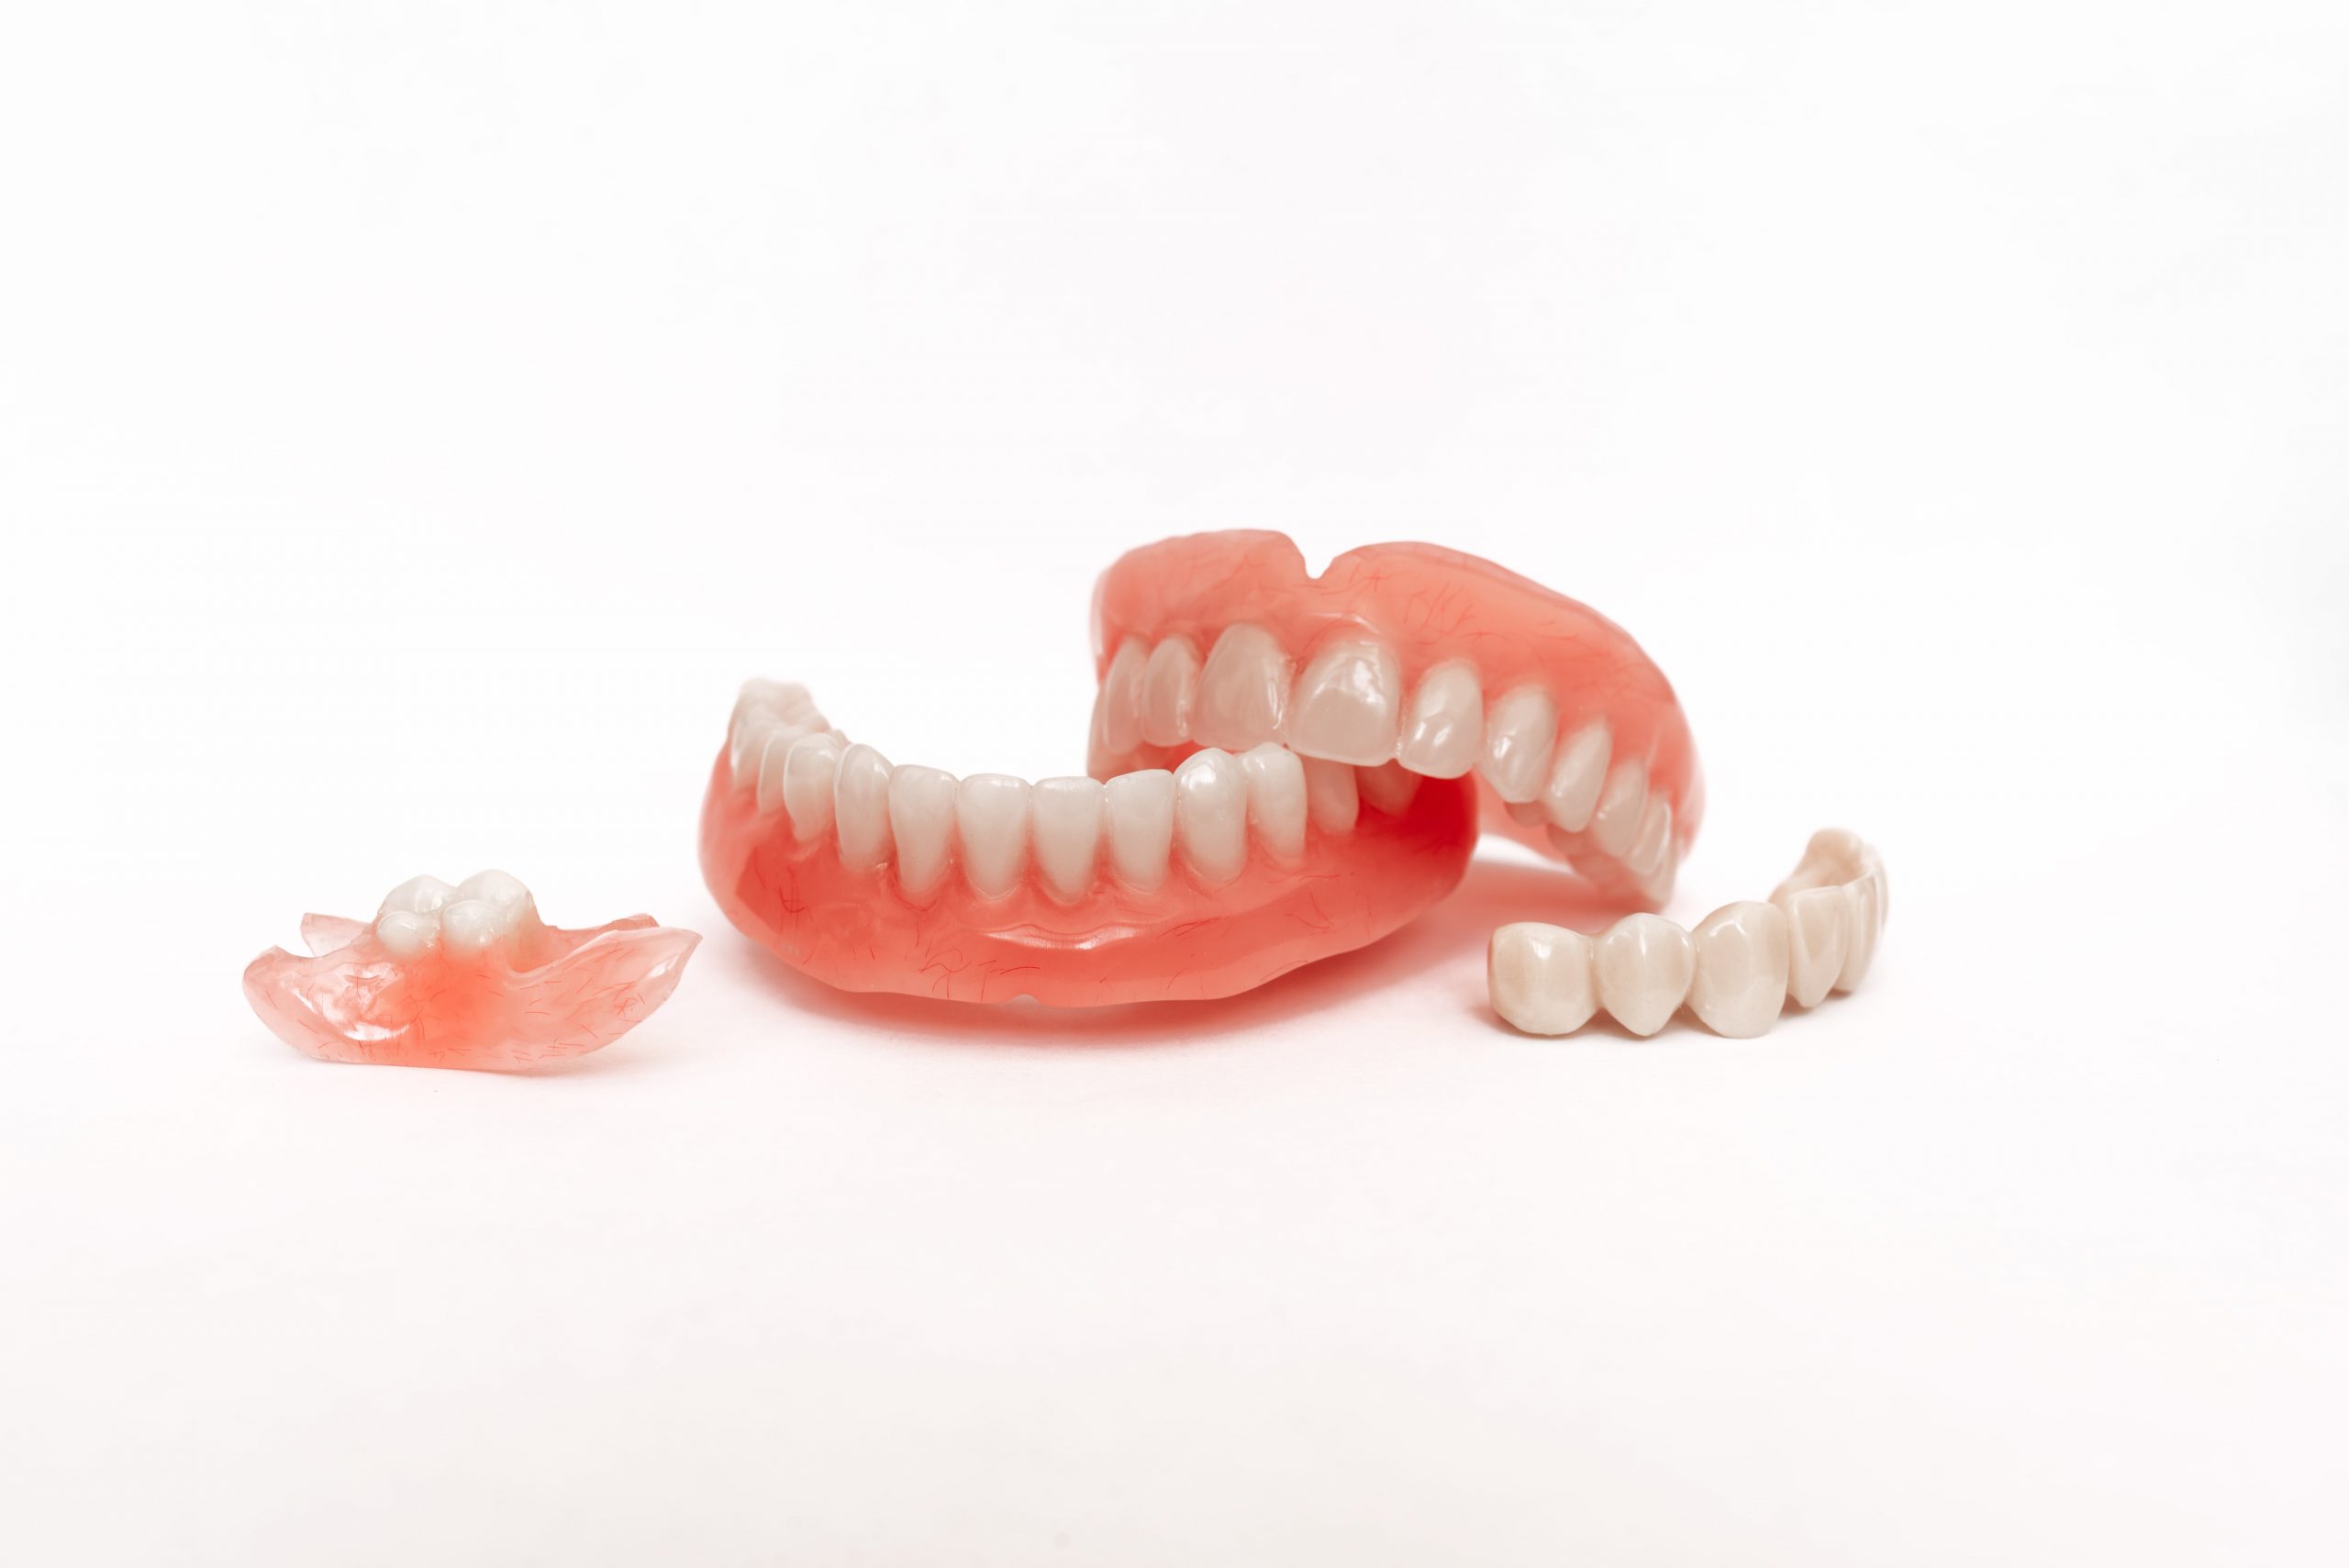 Common Signs That You Might Need Dentures